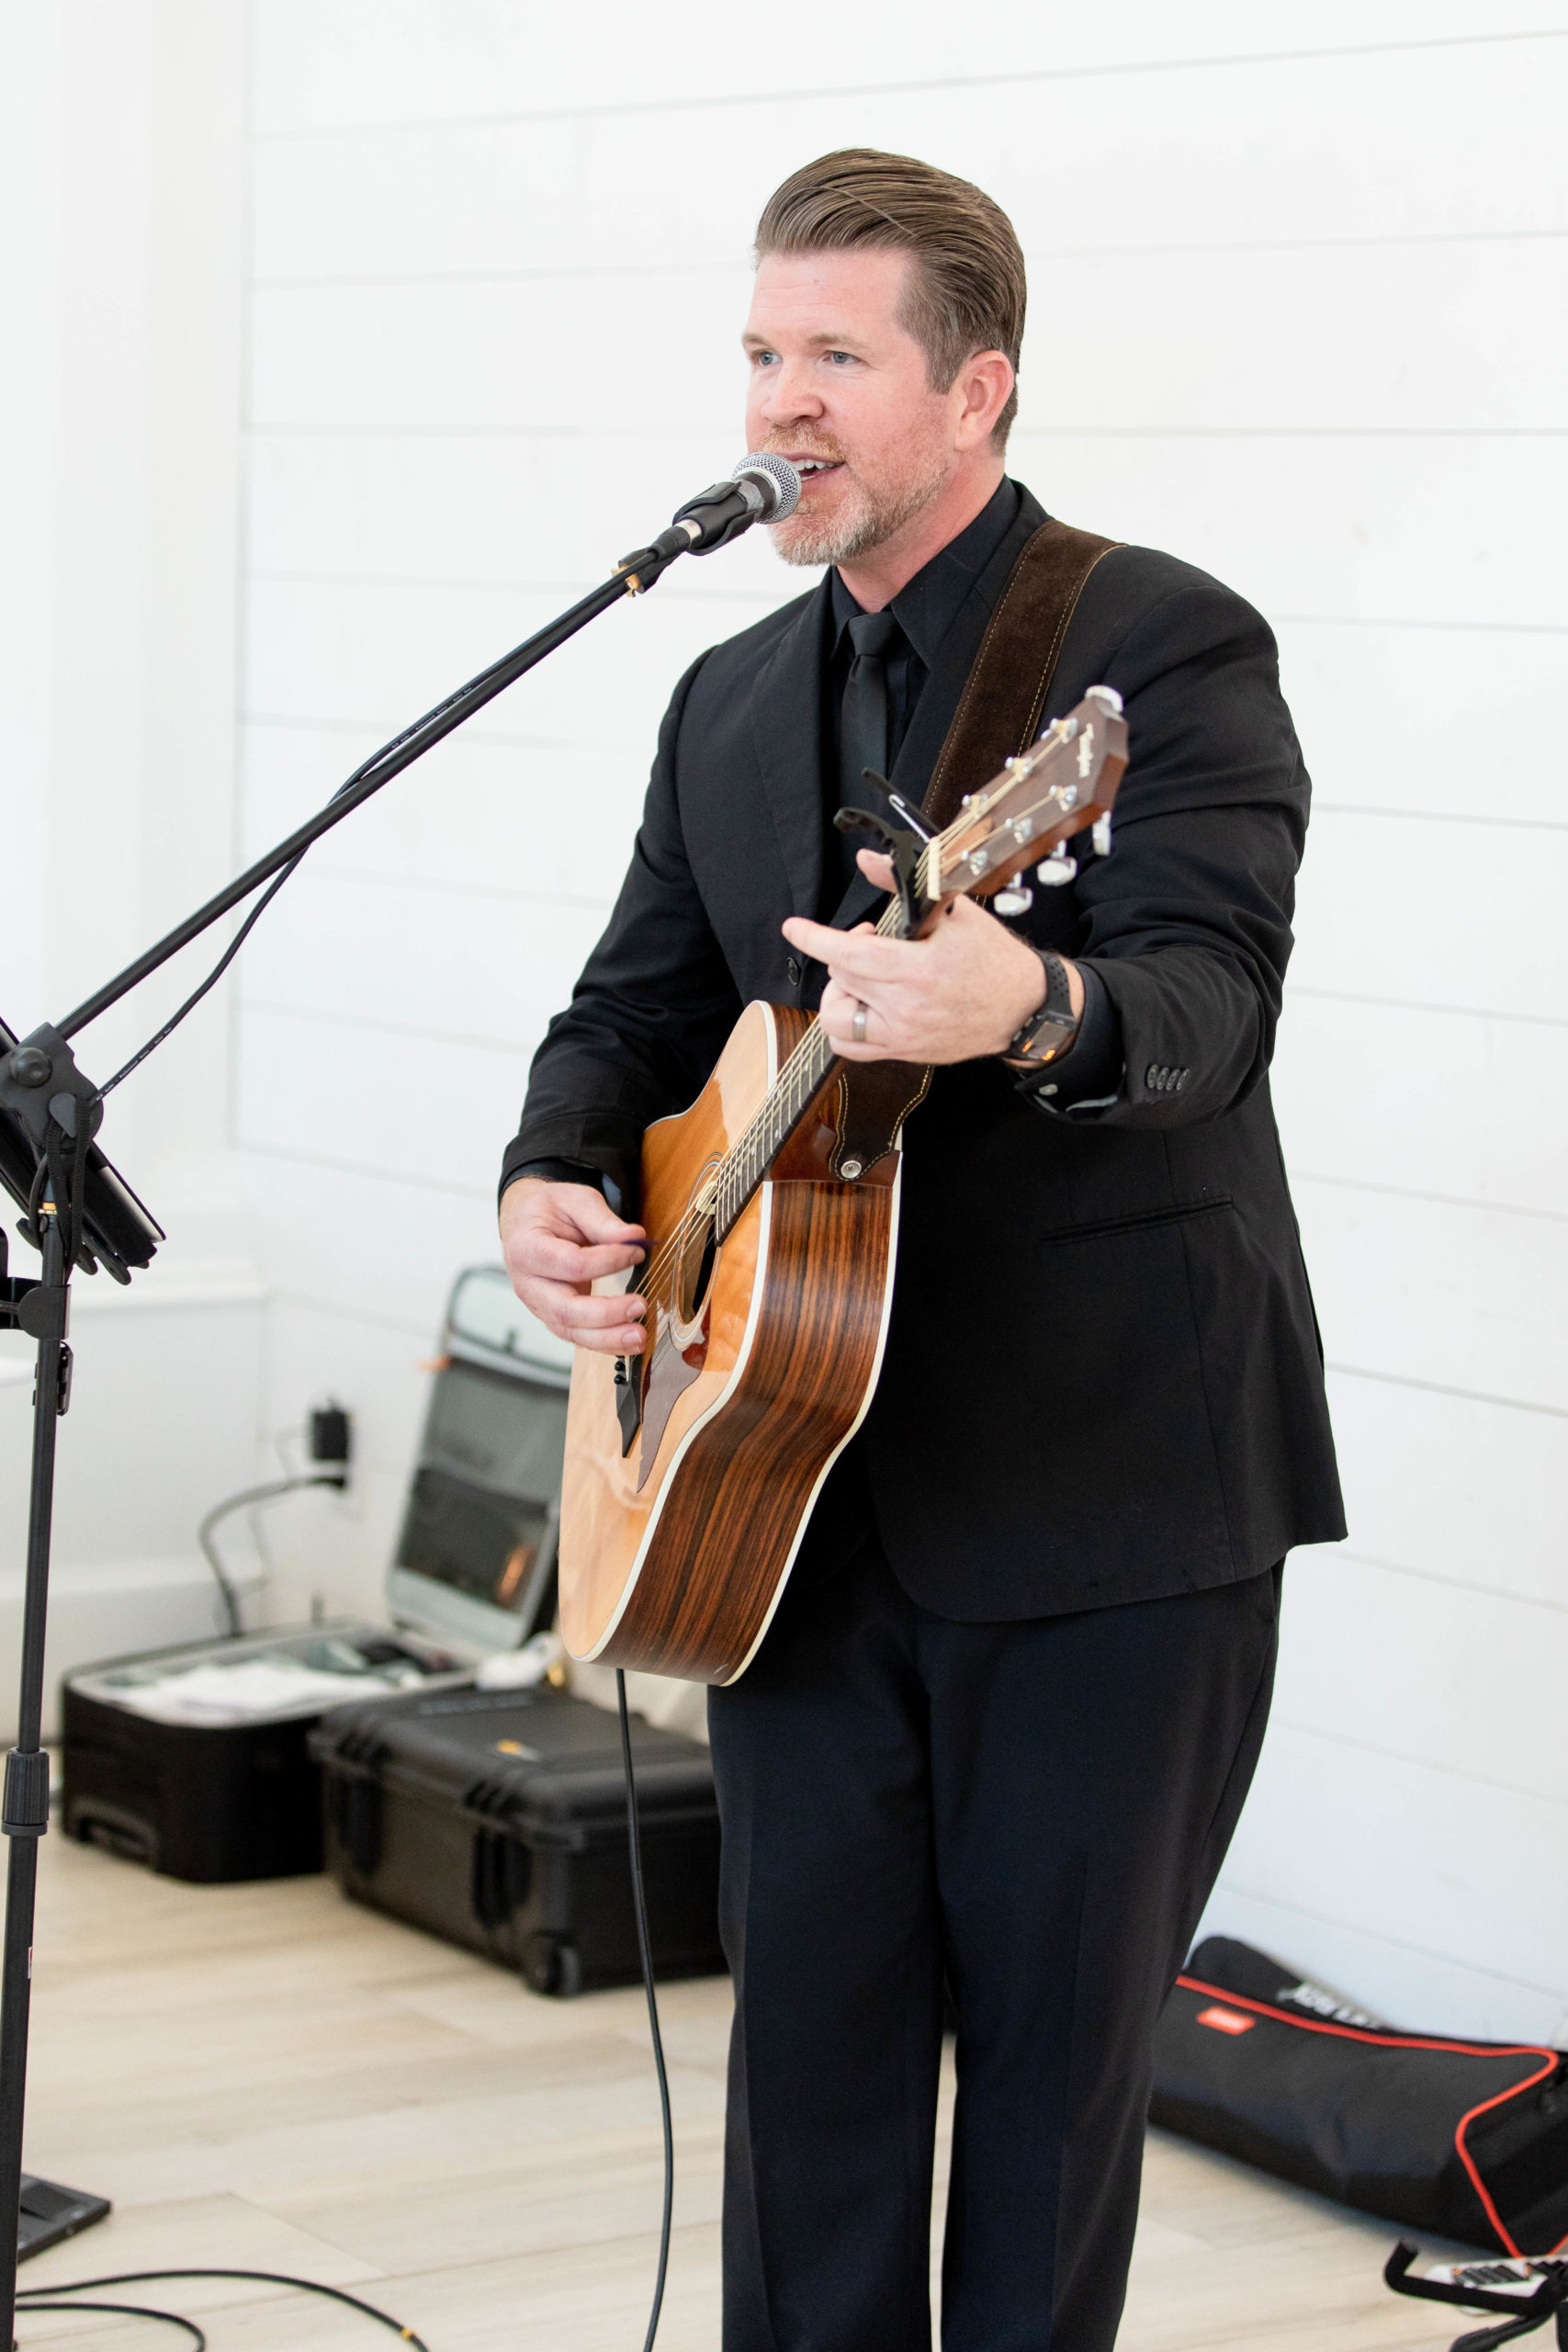 Man with a guitar performs live at a wedding reception